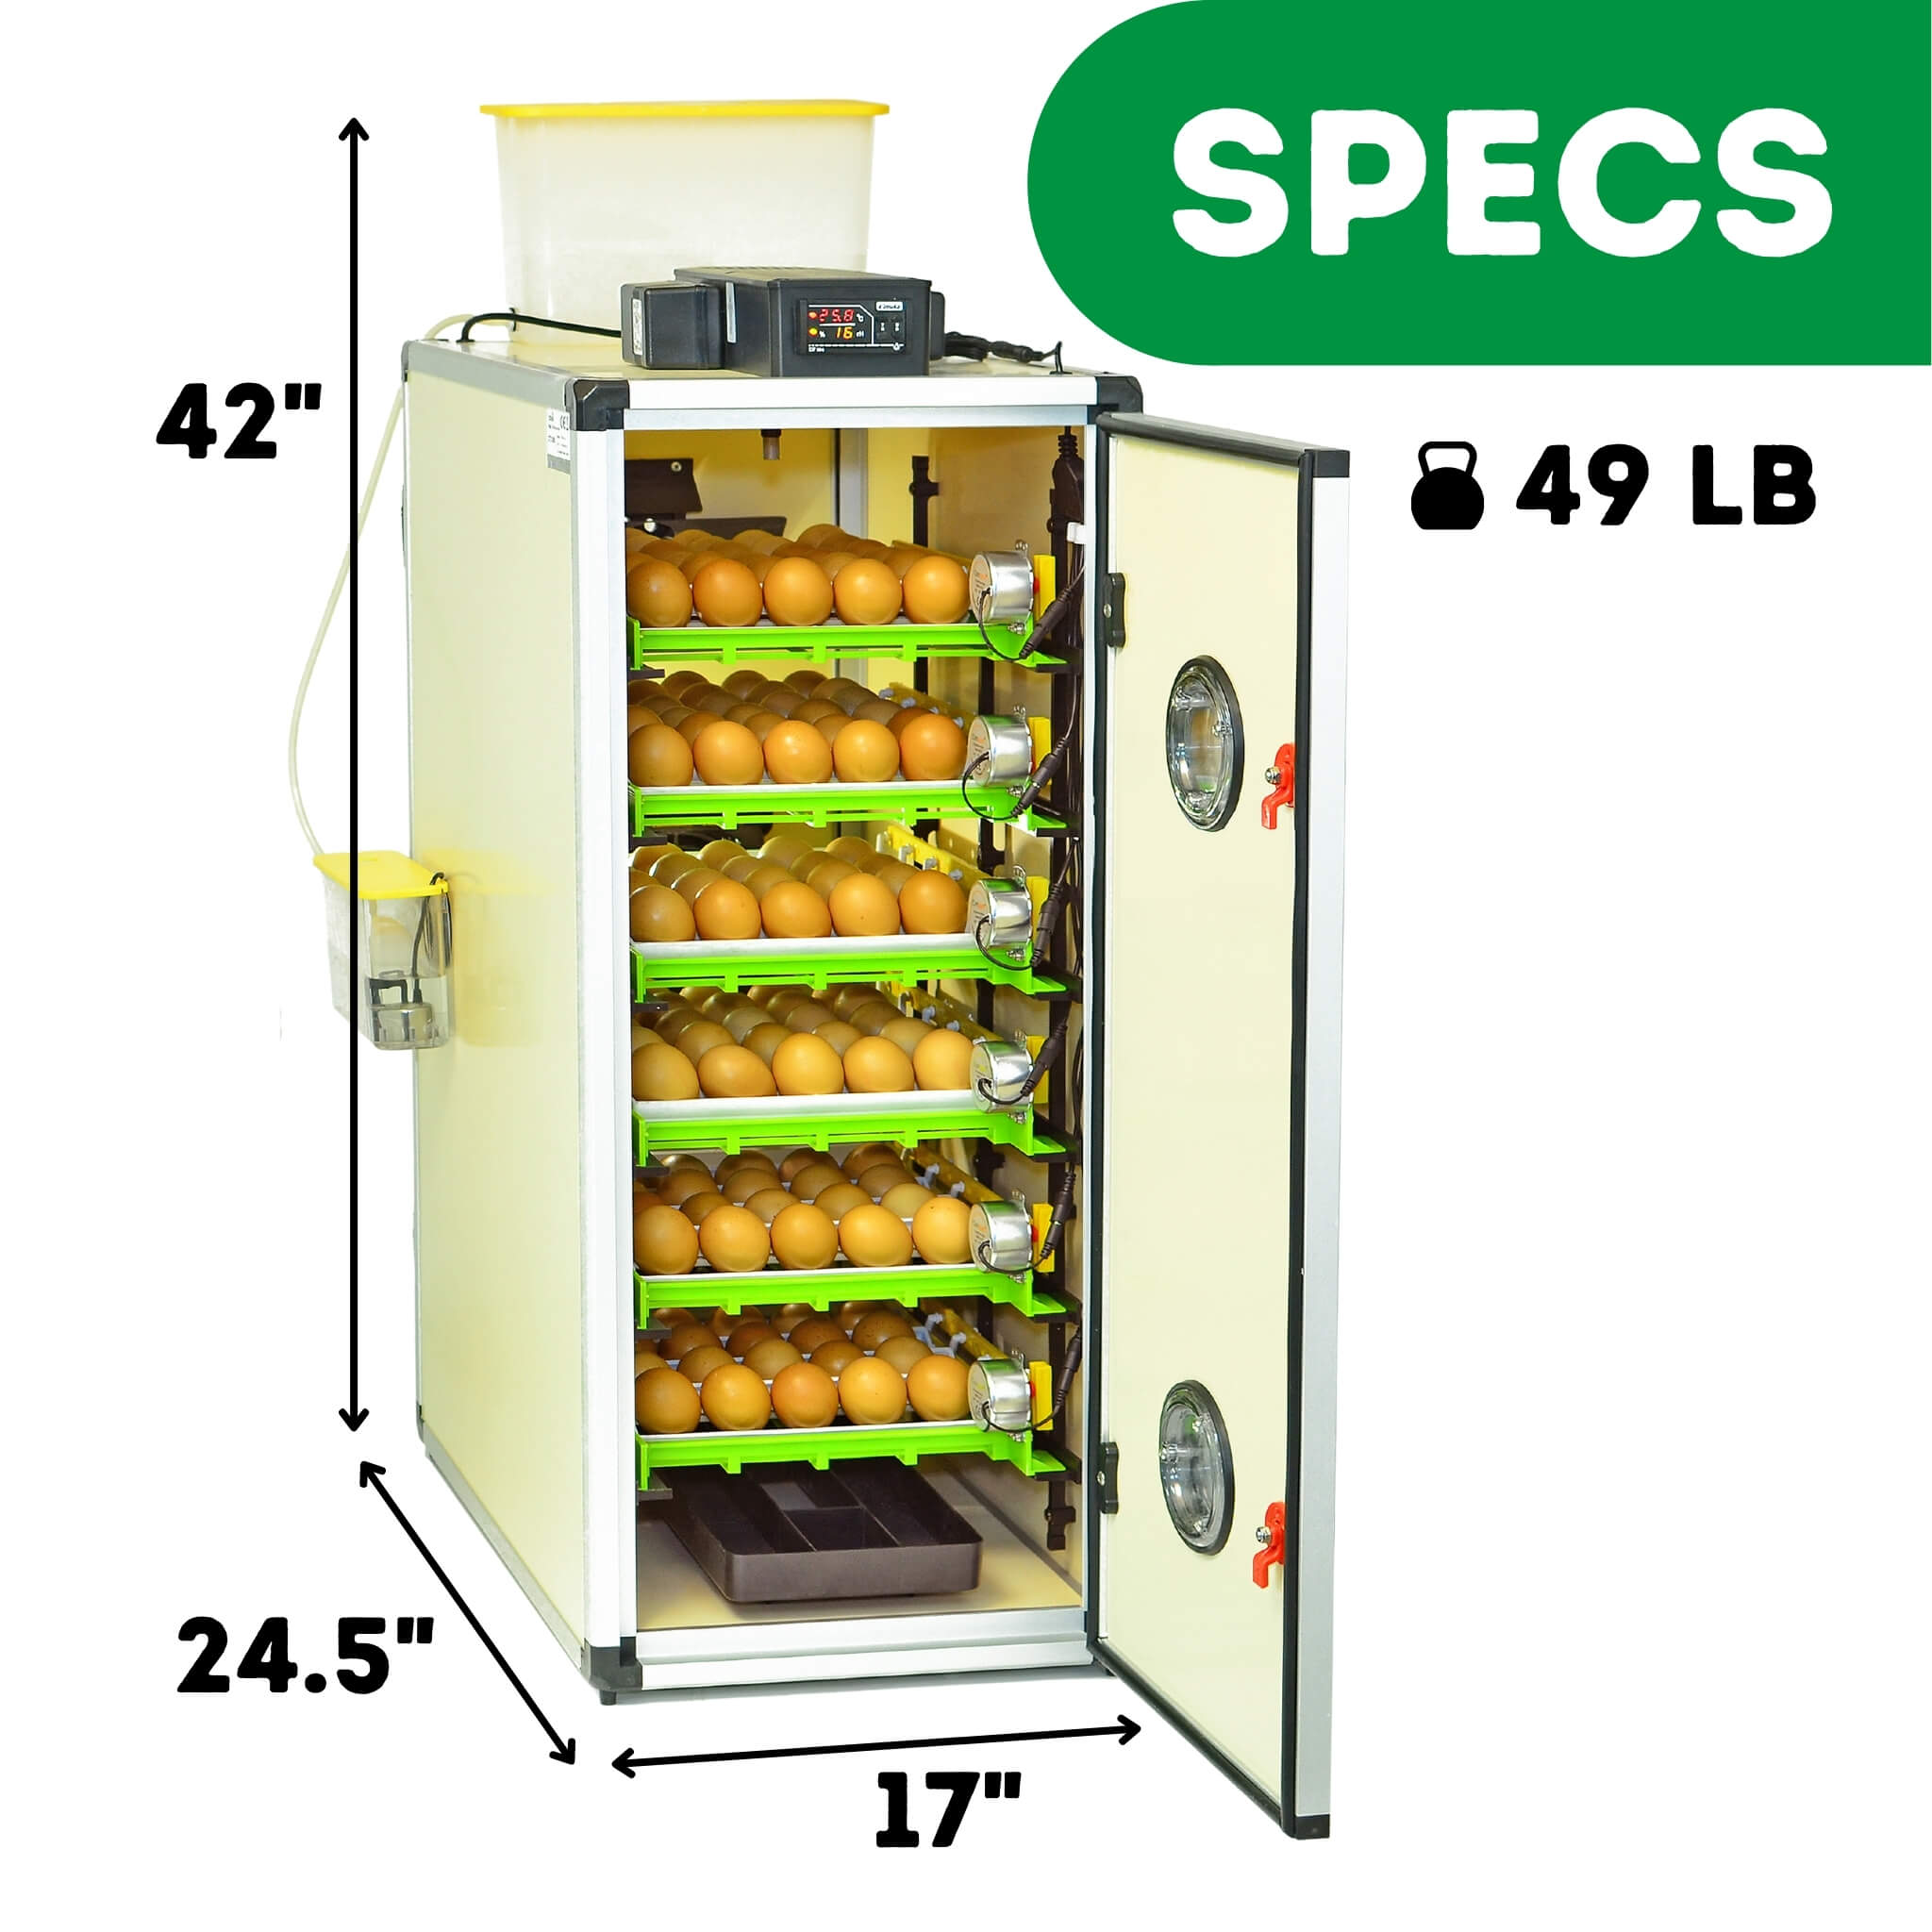 Hatching Time Cimuka CT180 Incubator. Infographic showing specifications of incubator. CT180 can be seen in image measuring 42 inches tall, 24.5 inches deep and 17 inches wide and weighing 49 pounds. Incubator is open, showing 6 egg setting trays full of brown chicken eggs, digital control can be seen on top of the incubator in front of water reservoir tank that is connected to Humisonic Humidifier.